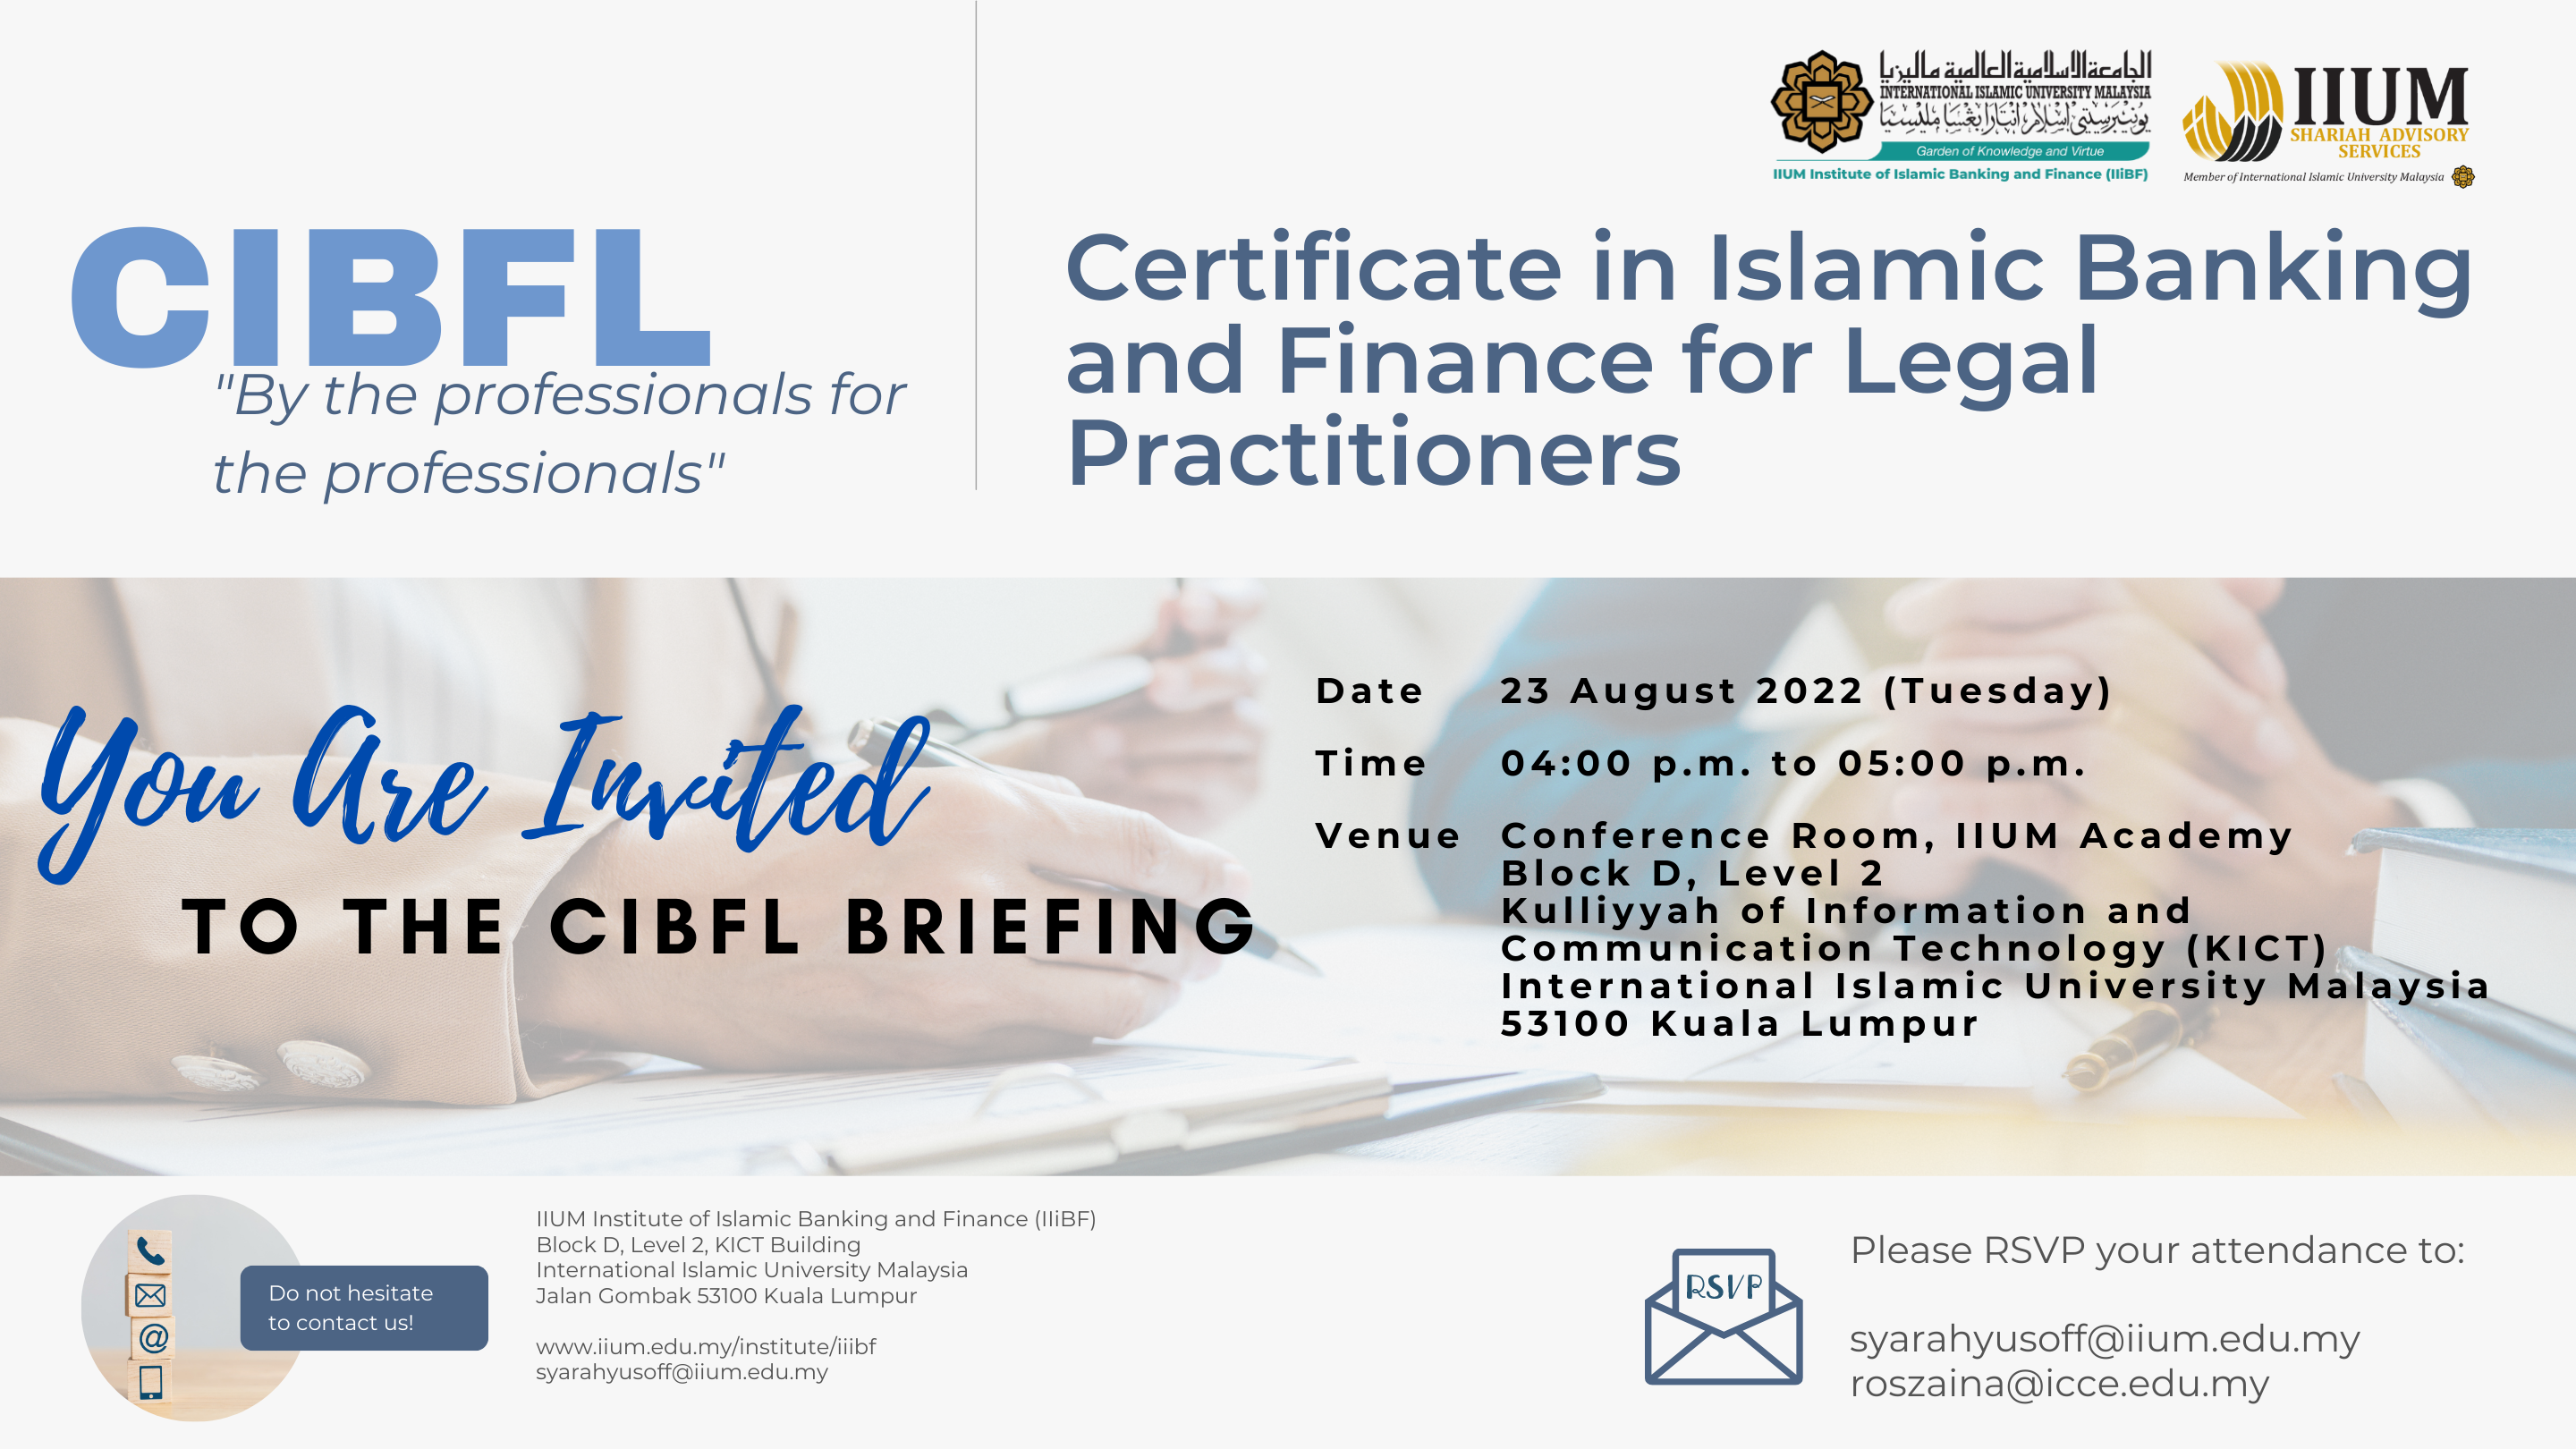 Briefing on Certificate in Islamic Banking and Finance for Legal Practitioners : Tuesday, 23rd August 2022